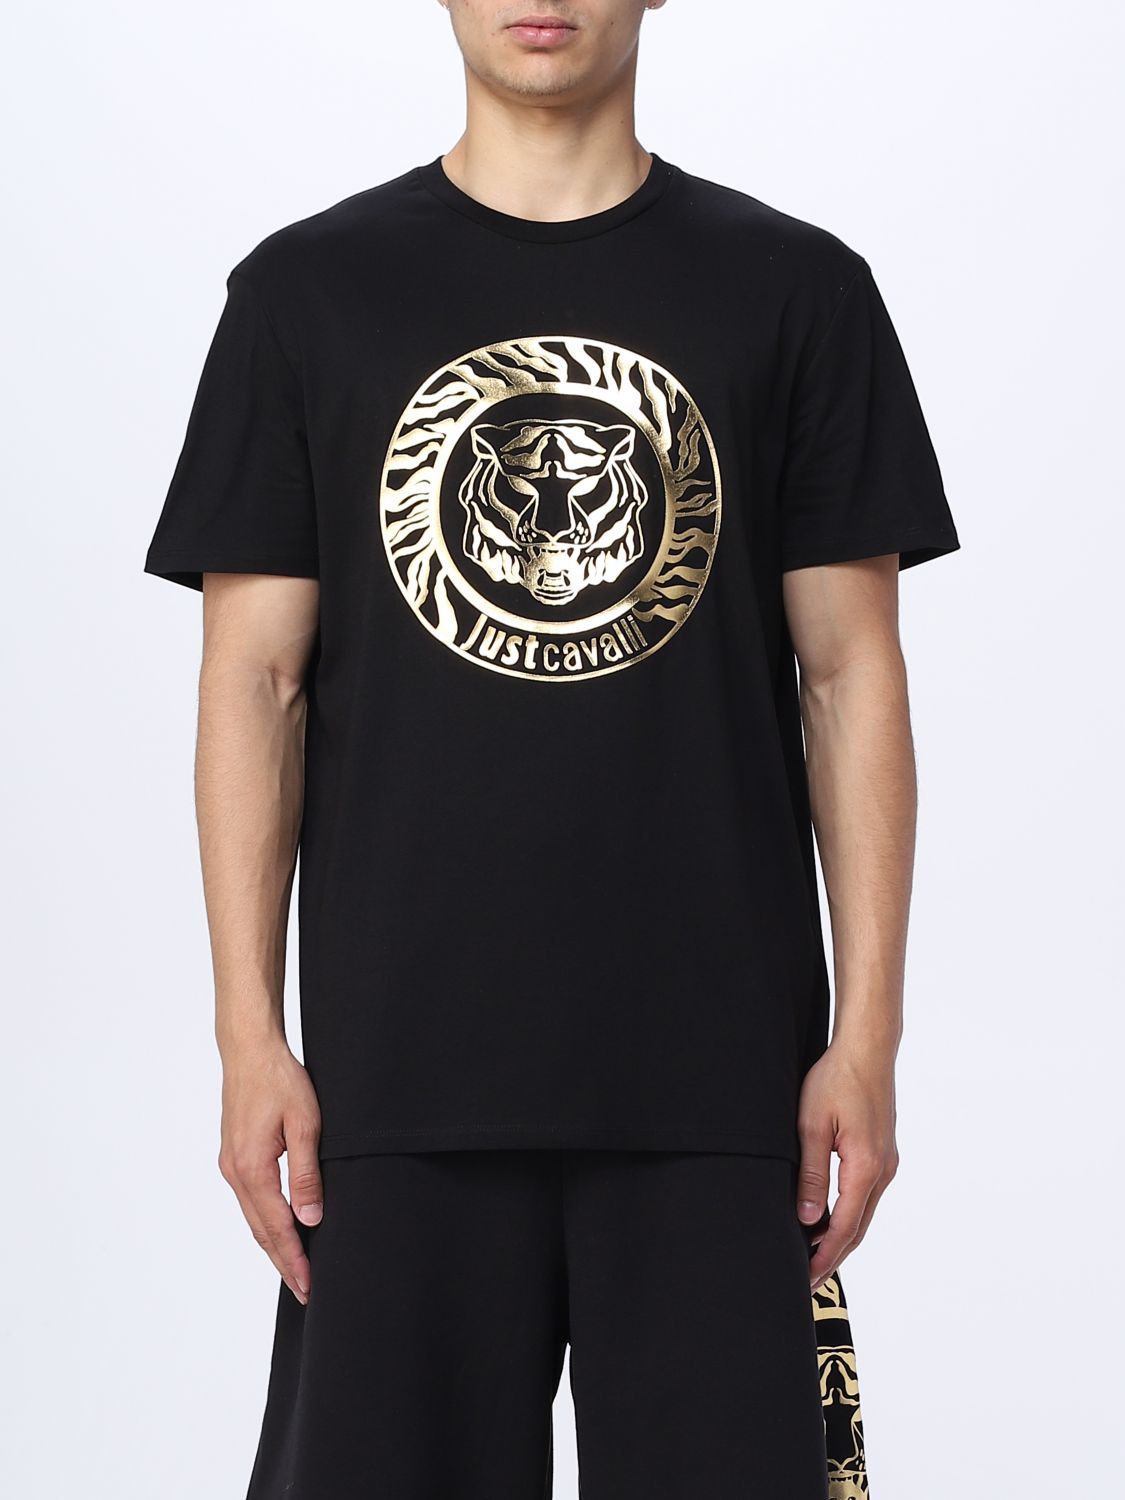 Cavalli Outlet: t-shirt for man - Black | Just Cavalli 74OBHF02CJ200 online at GIGLIO.COM